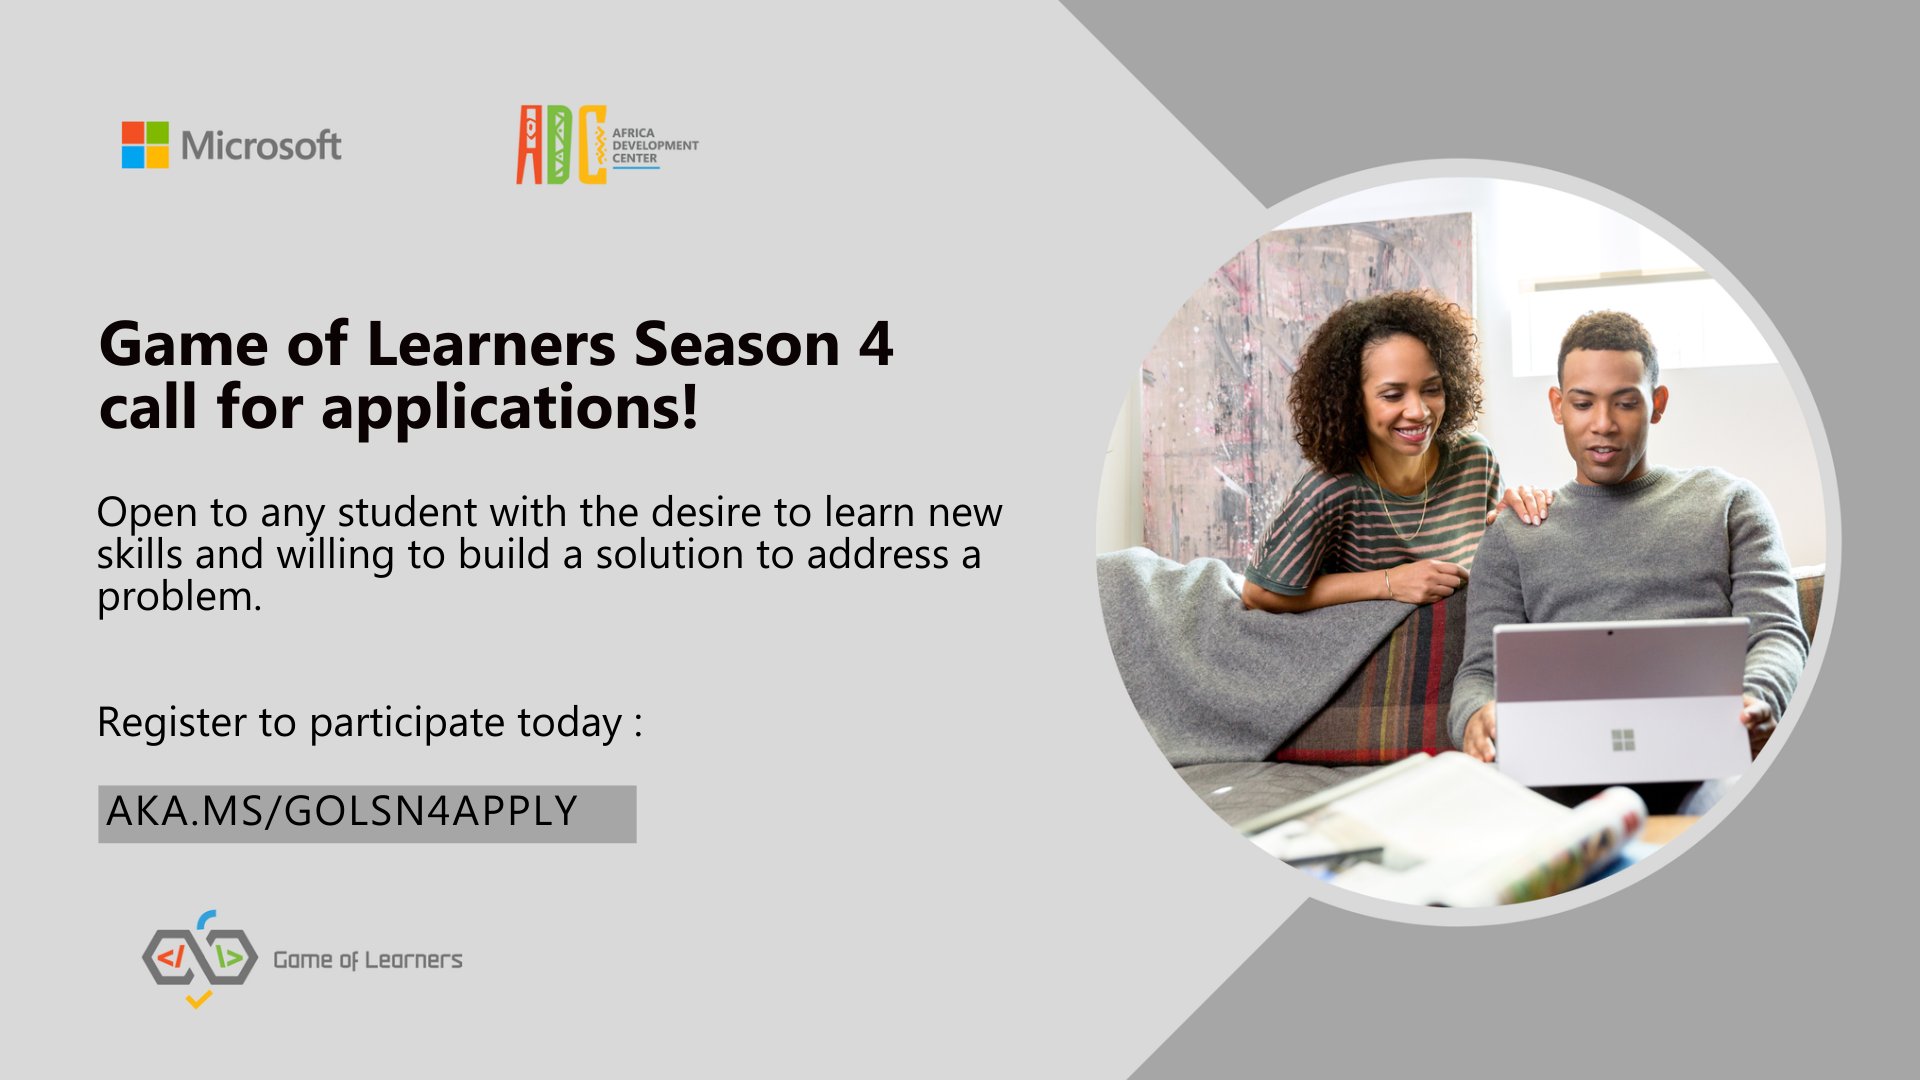 Microsoft Africa Development Center on X: Game of Learners (GOL) season 4  is about to go live! The 5-week virtual hackathon gives students an  opportunity to build solutions that address real-world problems